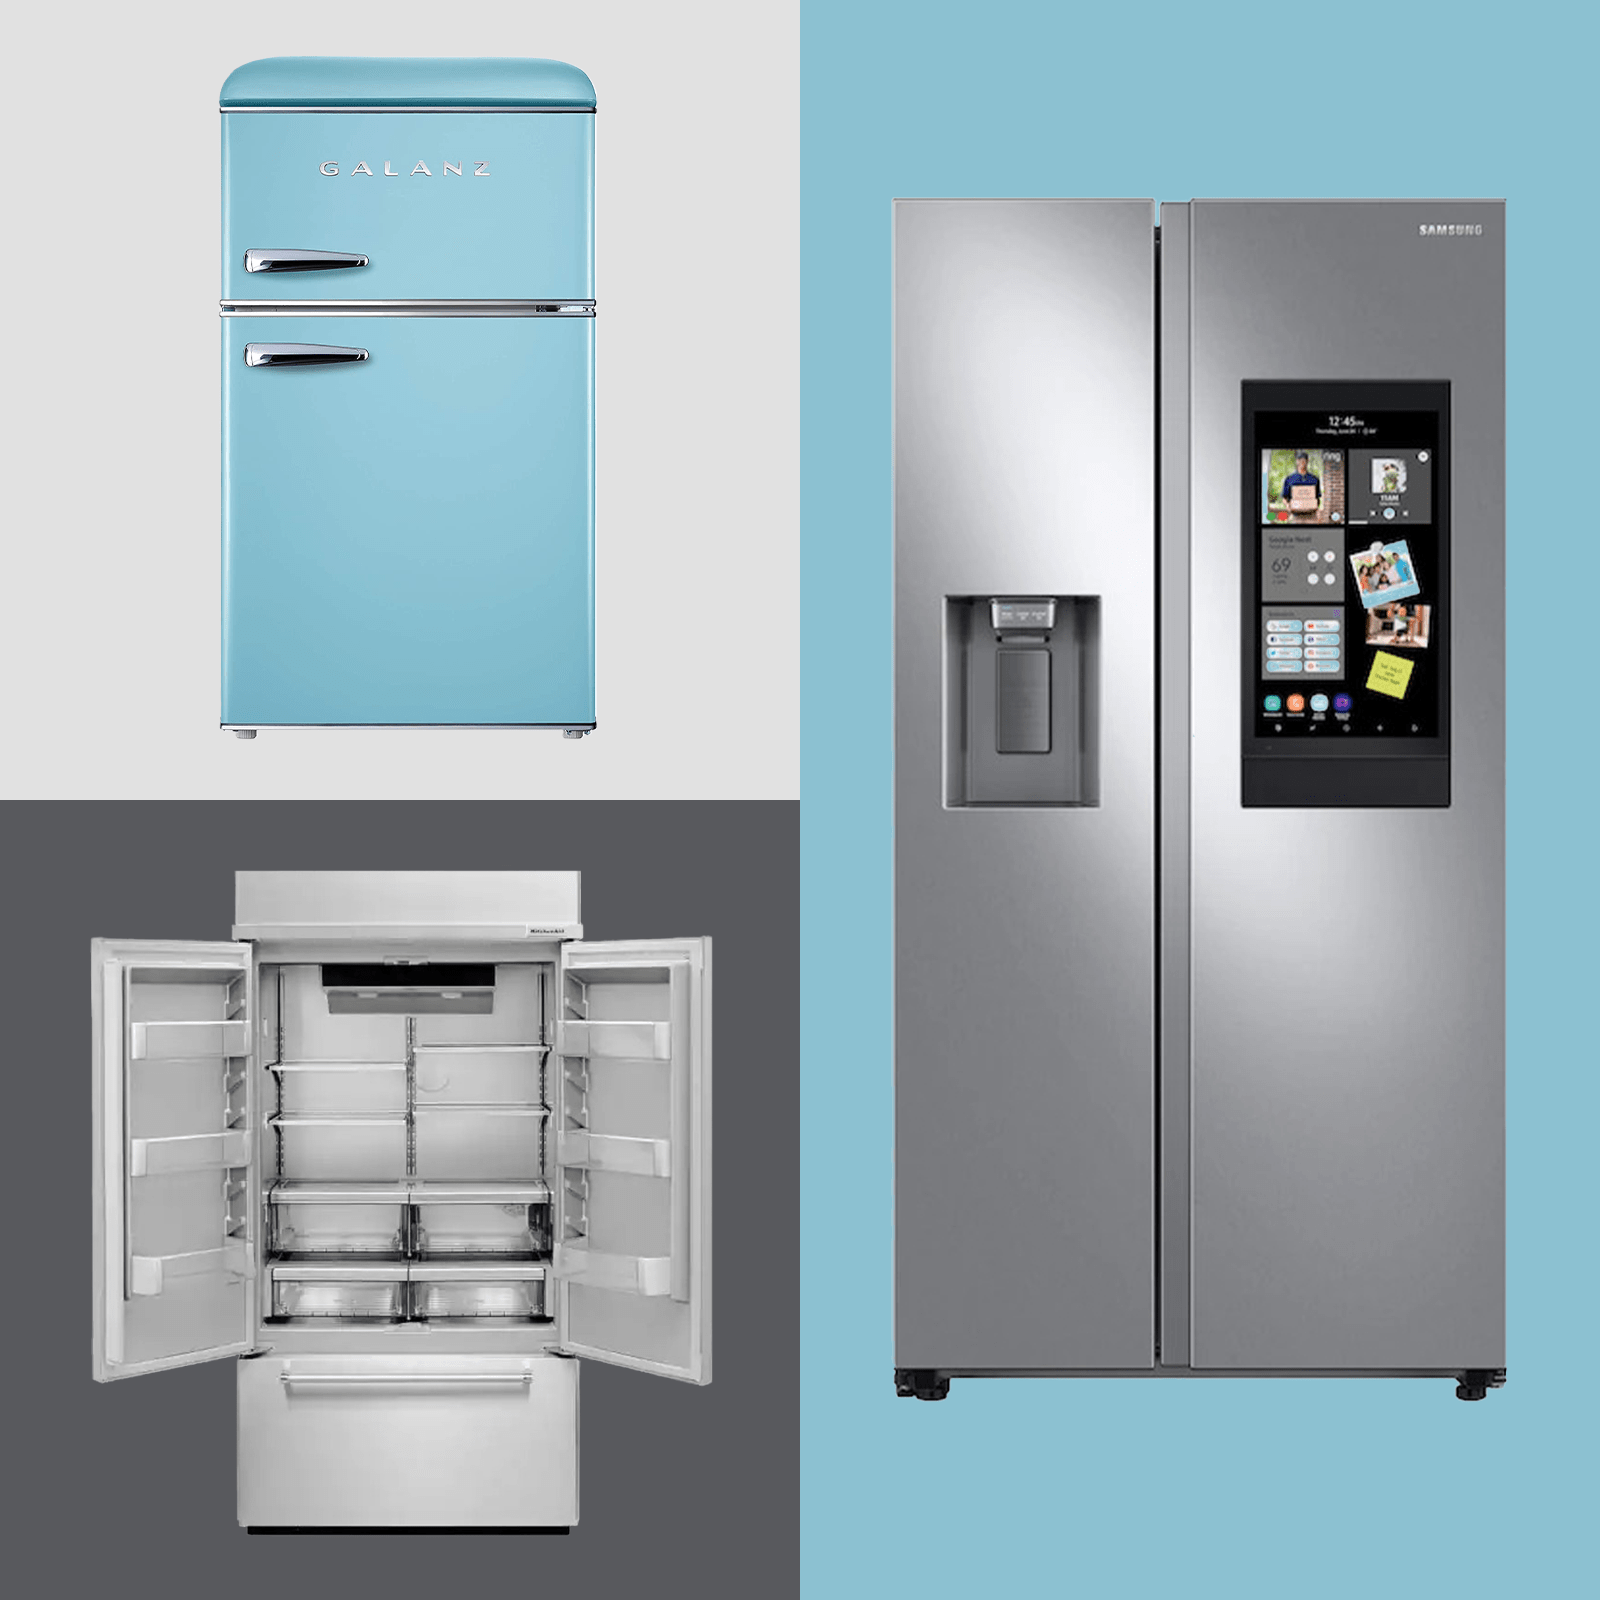 Best Refrigerators You Can Buy in 2022